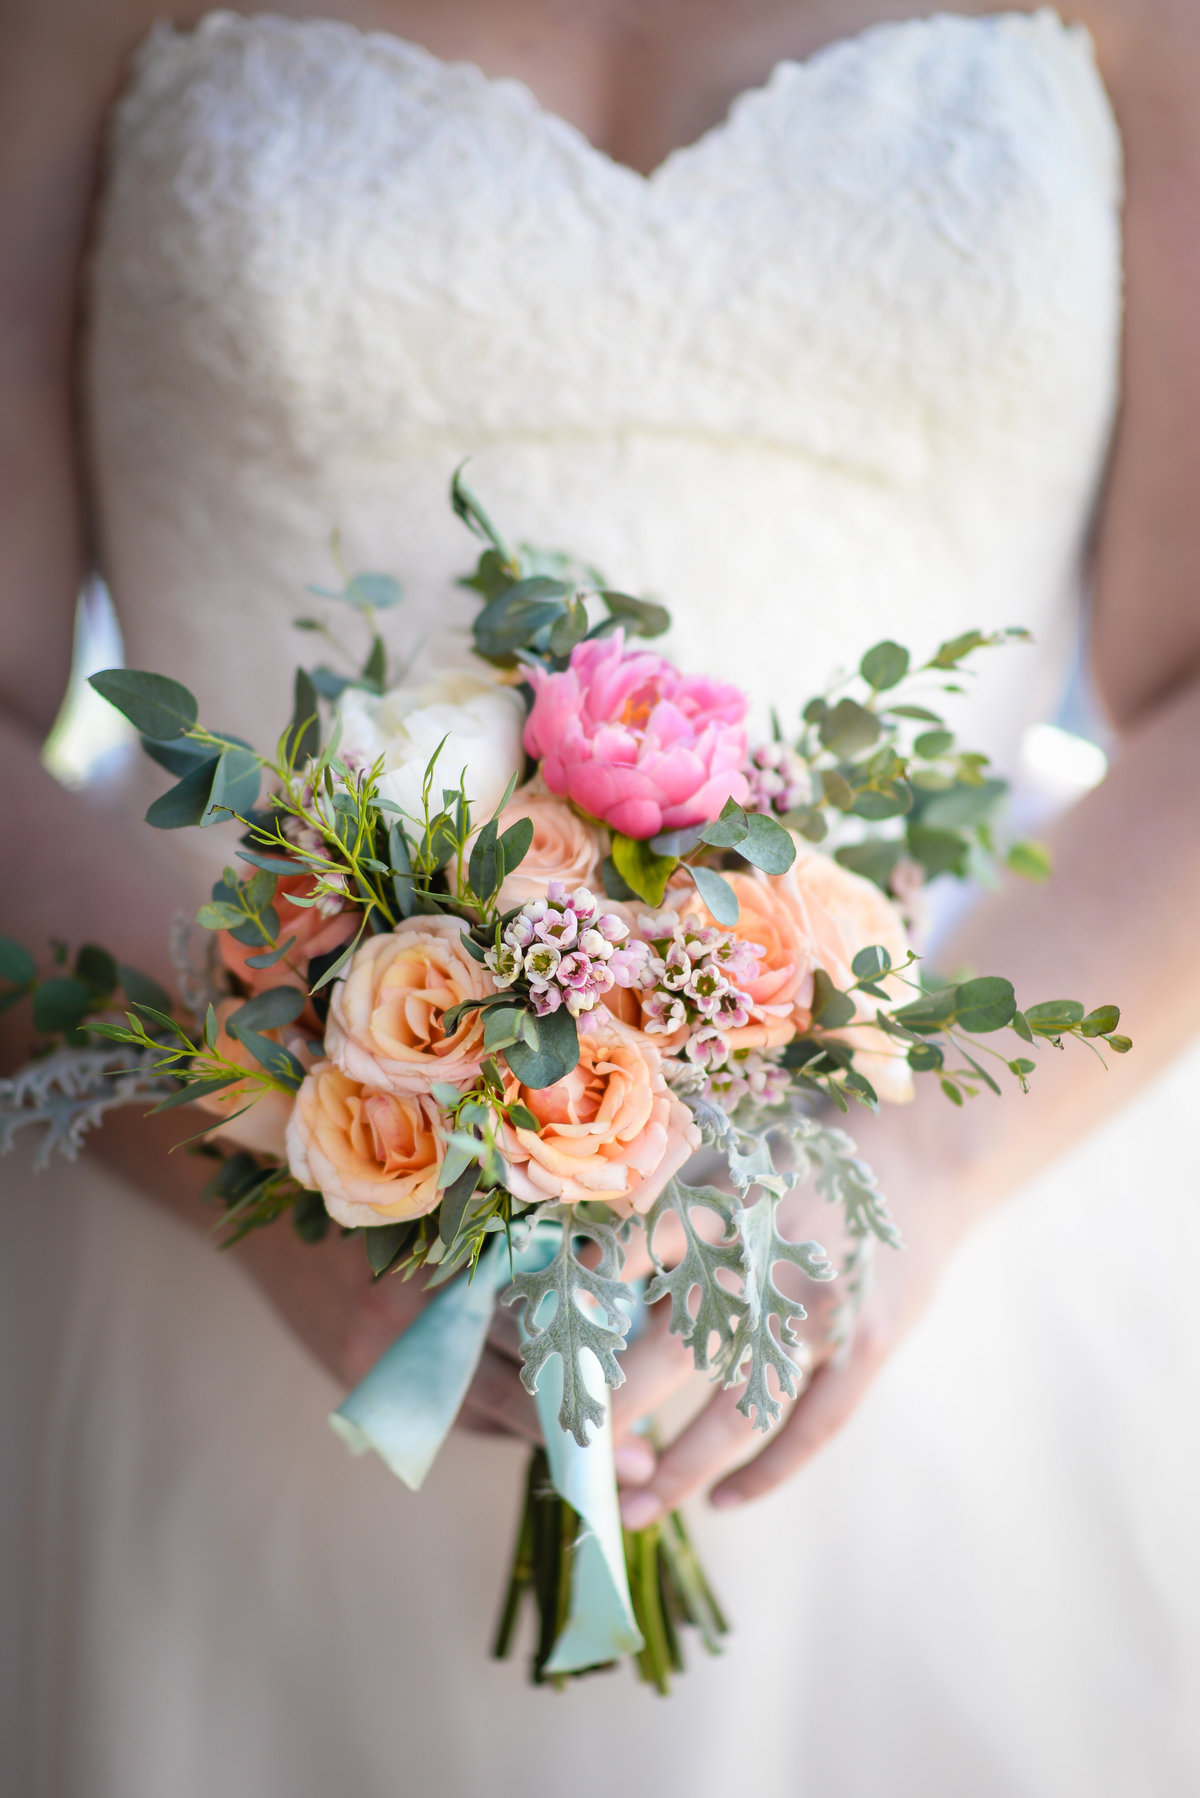 Beautiful NOLA Wedding Photography: Brides bouquet with pink, peach and green by Leaf + Petal at Race & Religious